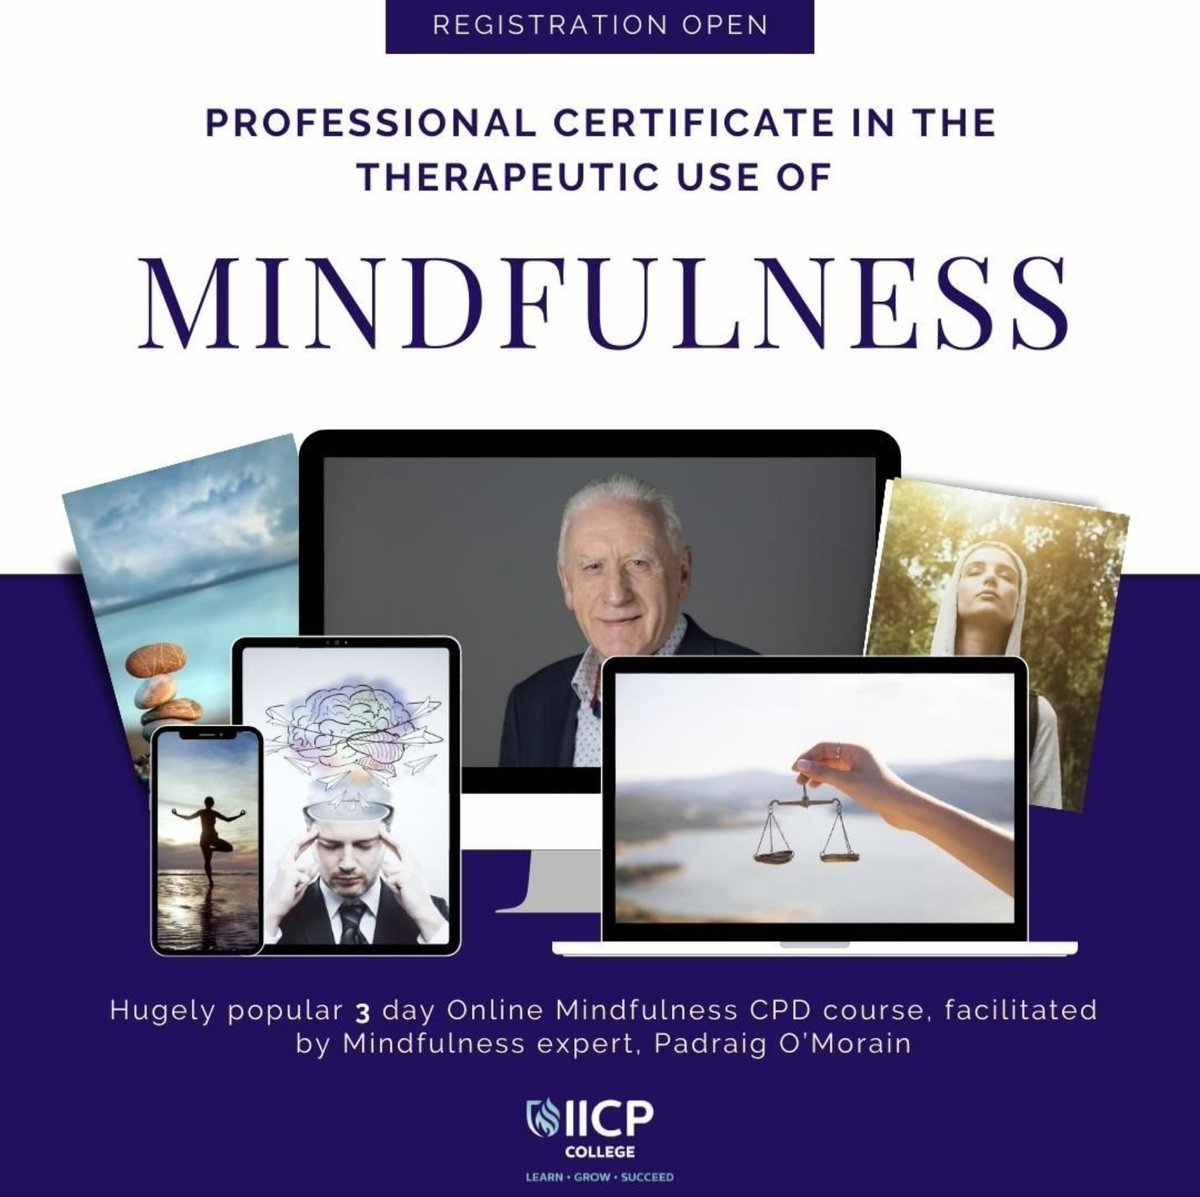 Last day to register for the Certificate in the Therapeutic Use of Mindfulness @IICP_Education. Aimed at those who want to use mindfulness interventions in their work, the 3 day course covers the benefits of mindfulness for anxiety, depression &wellbeing: zurl.co/gco